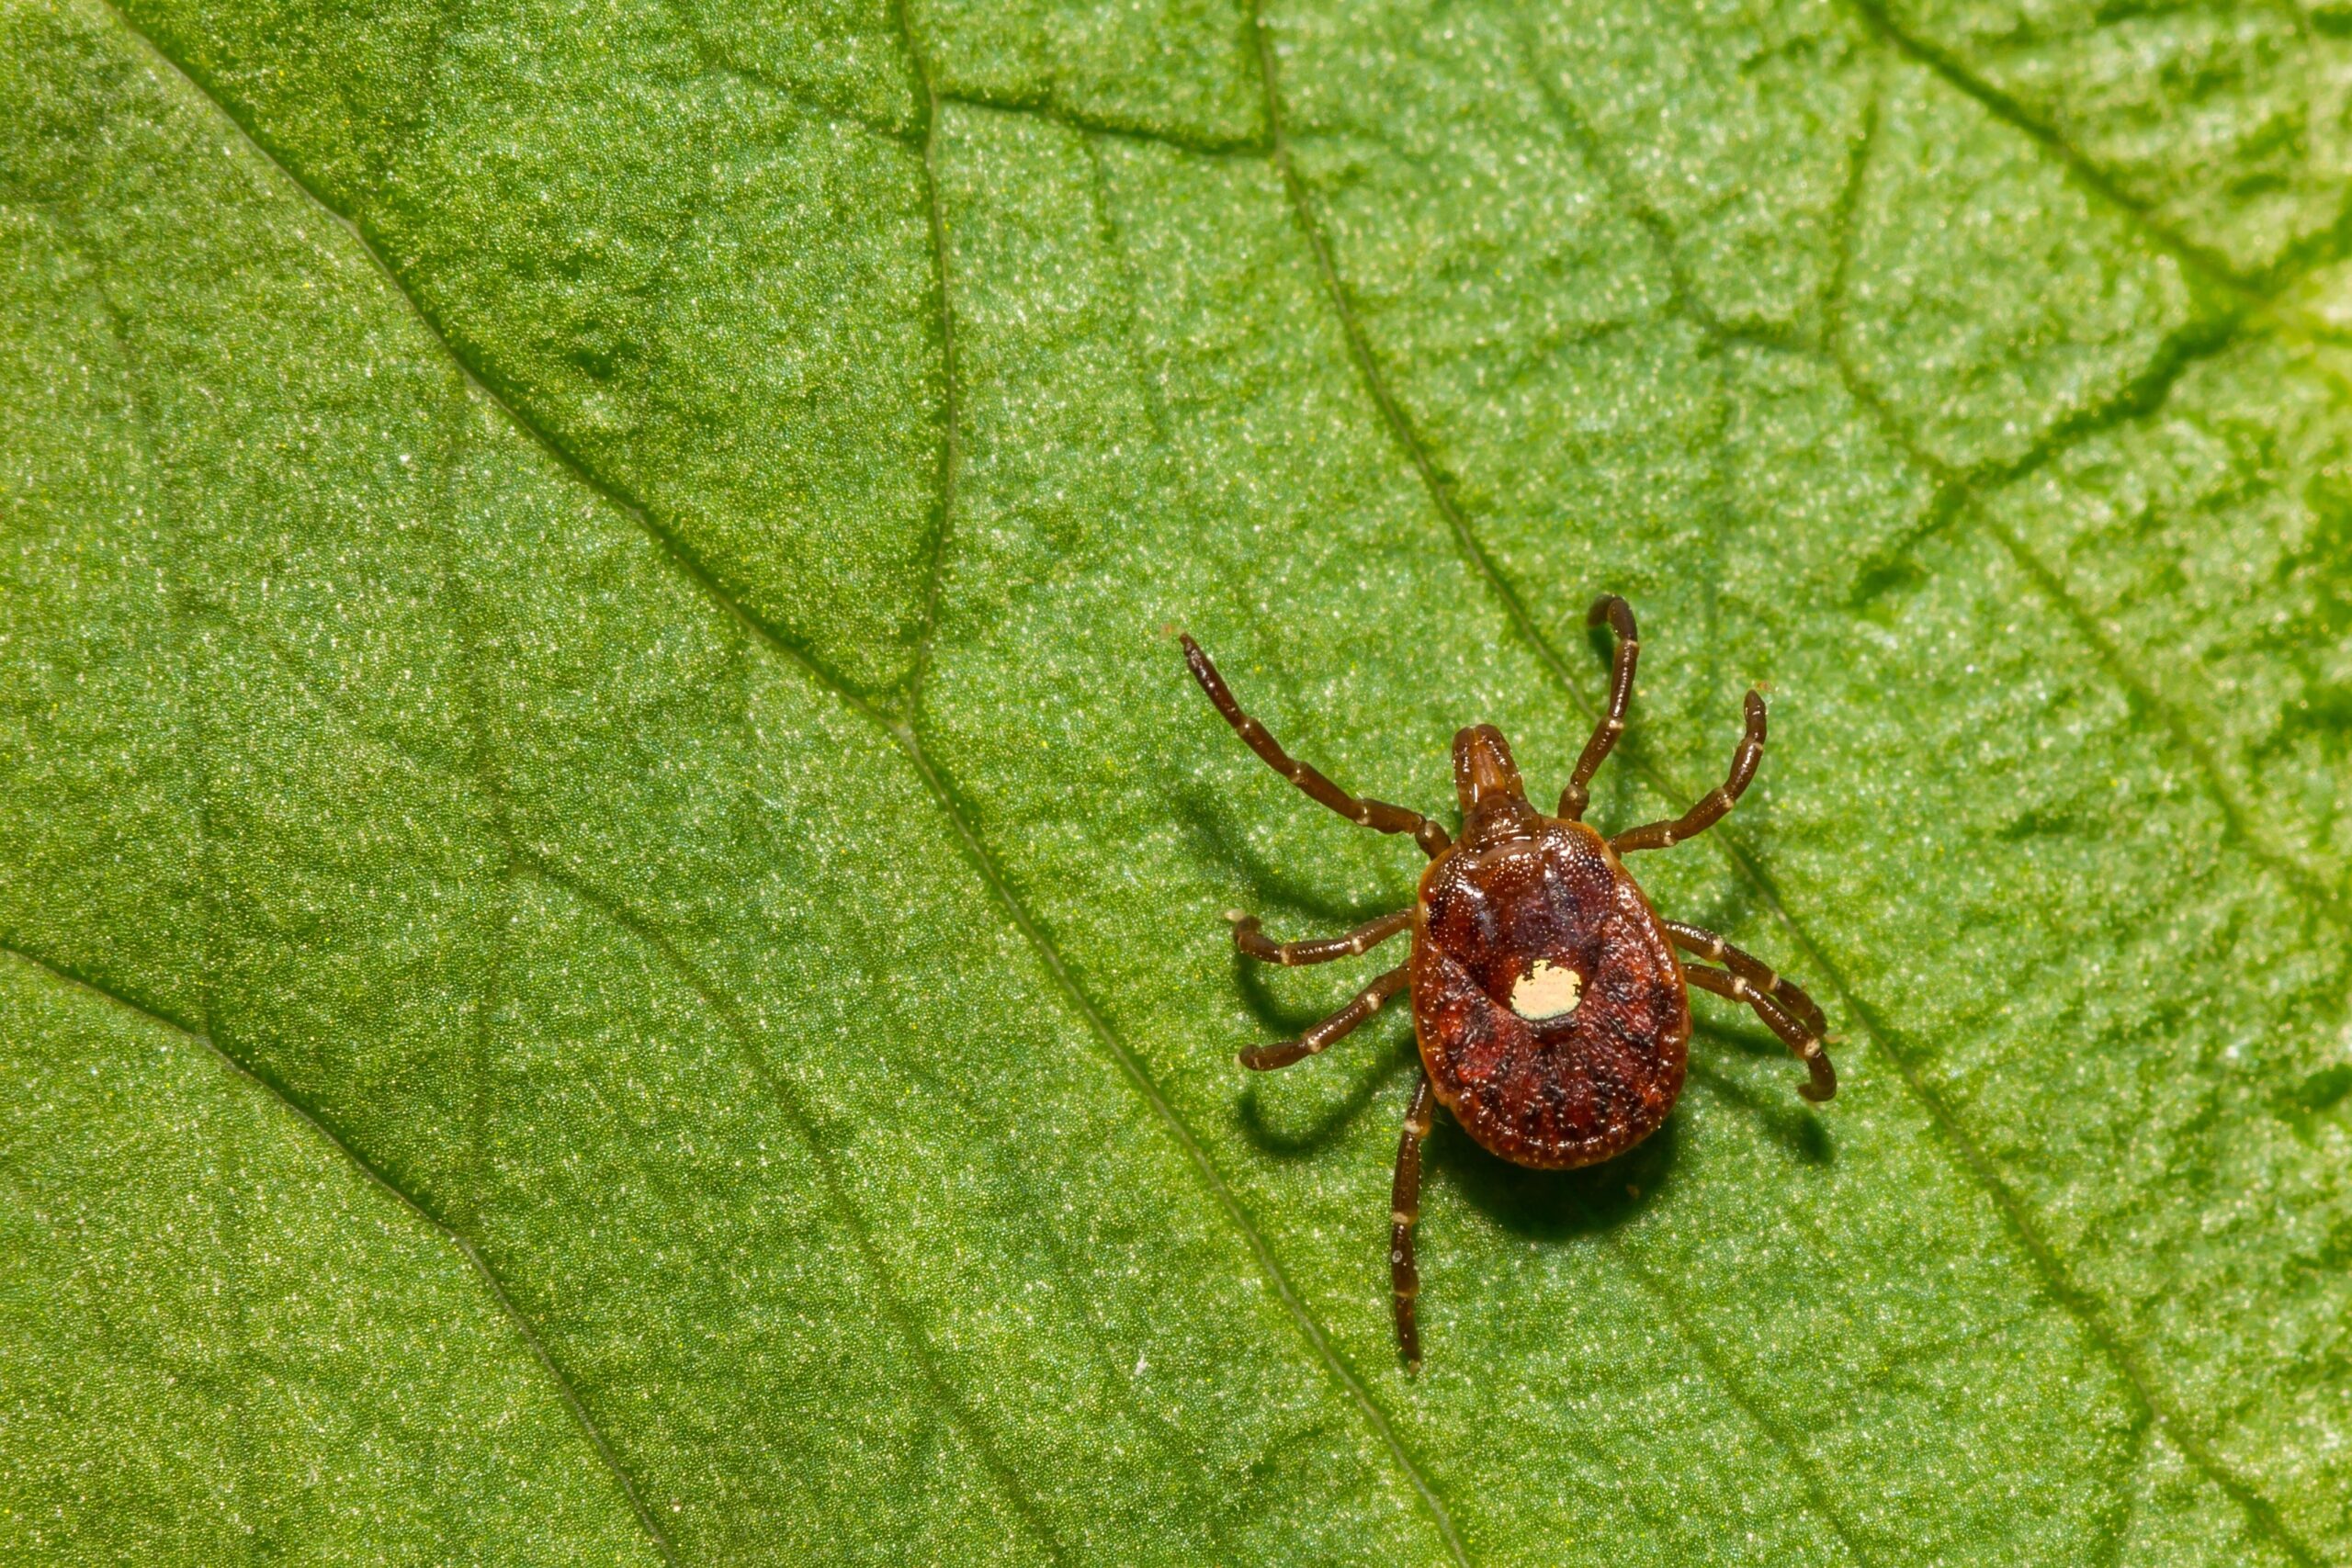 A close-up of a single lone star tick on a bright green leaf.